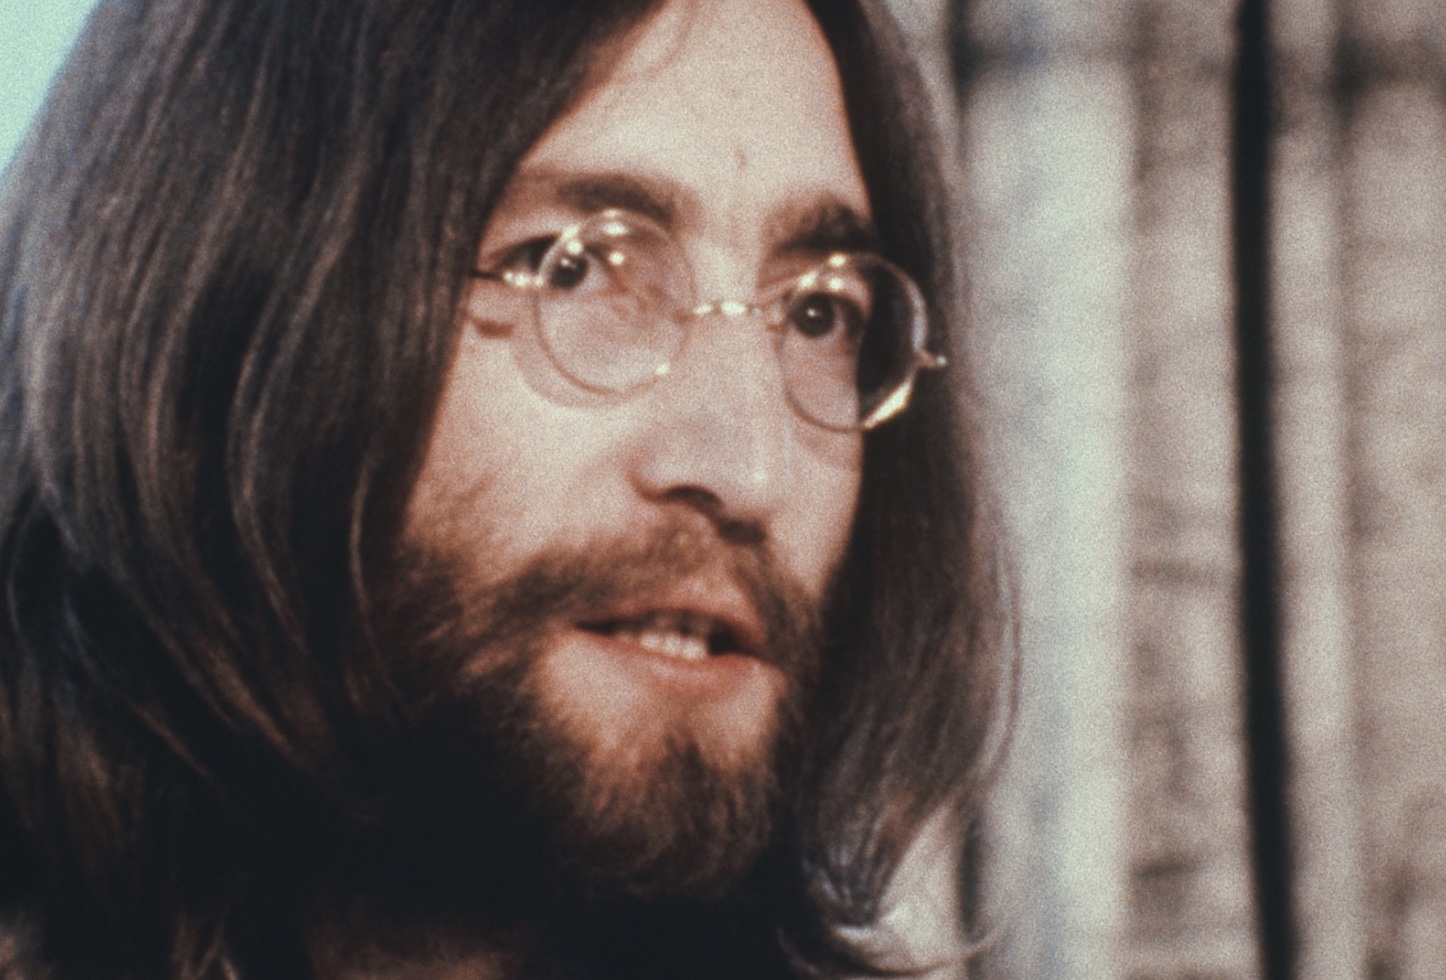 Exclusive: Watch a new clip from ‘John Lennon: Murder Without A Trial’